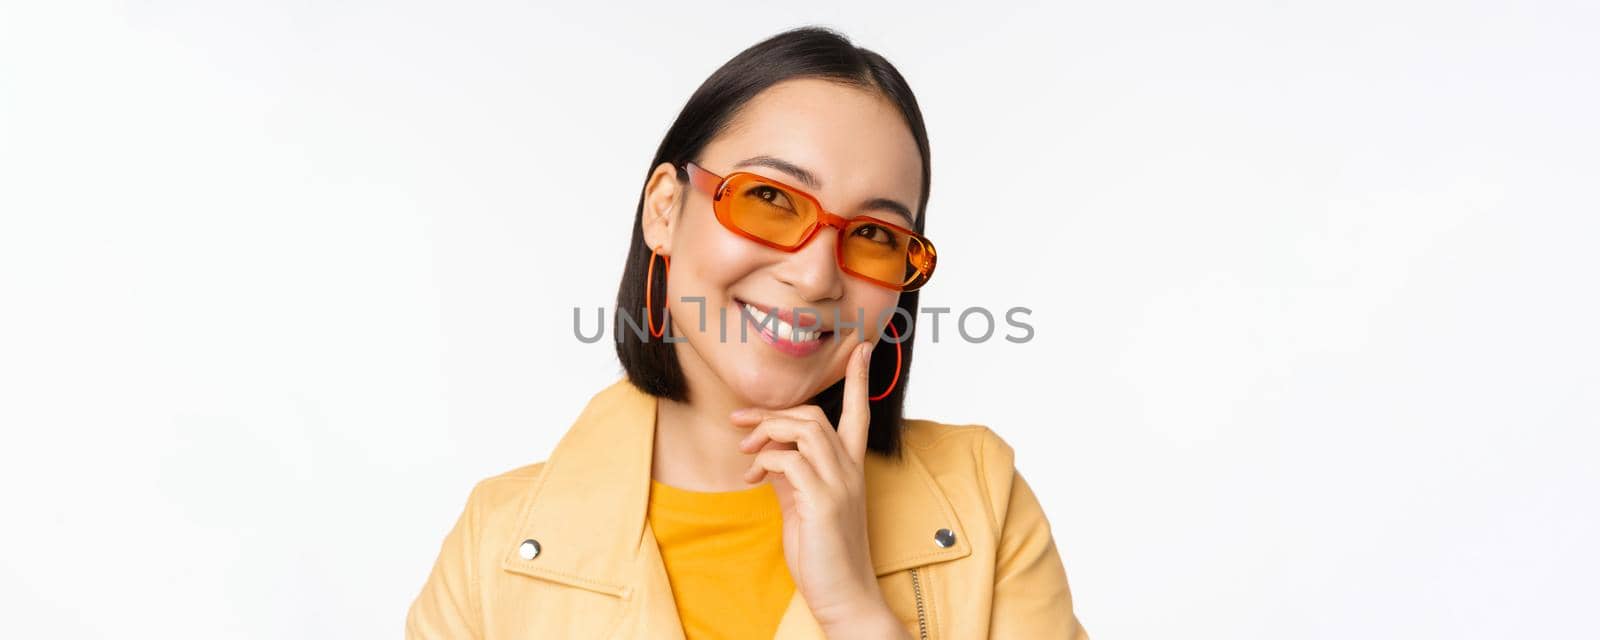 Close up portrait of asian woman thinking, wearing sunglasses and smiling, looking up thoughtful, standing over white studio background. Copy space